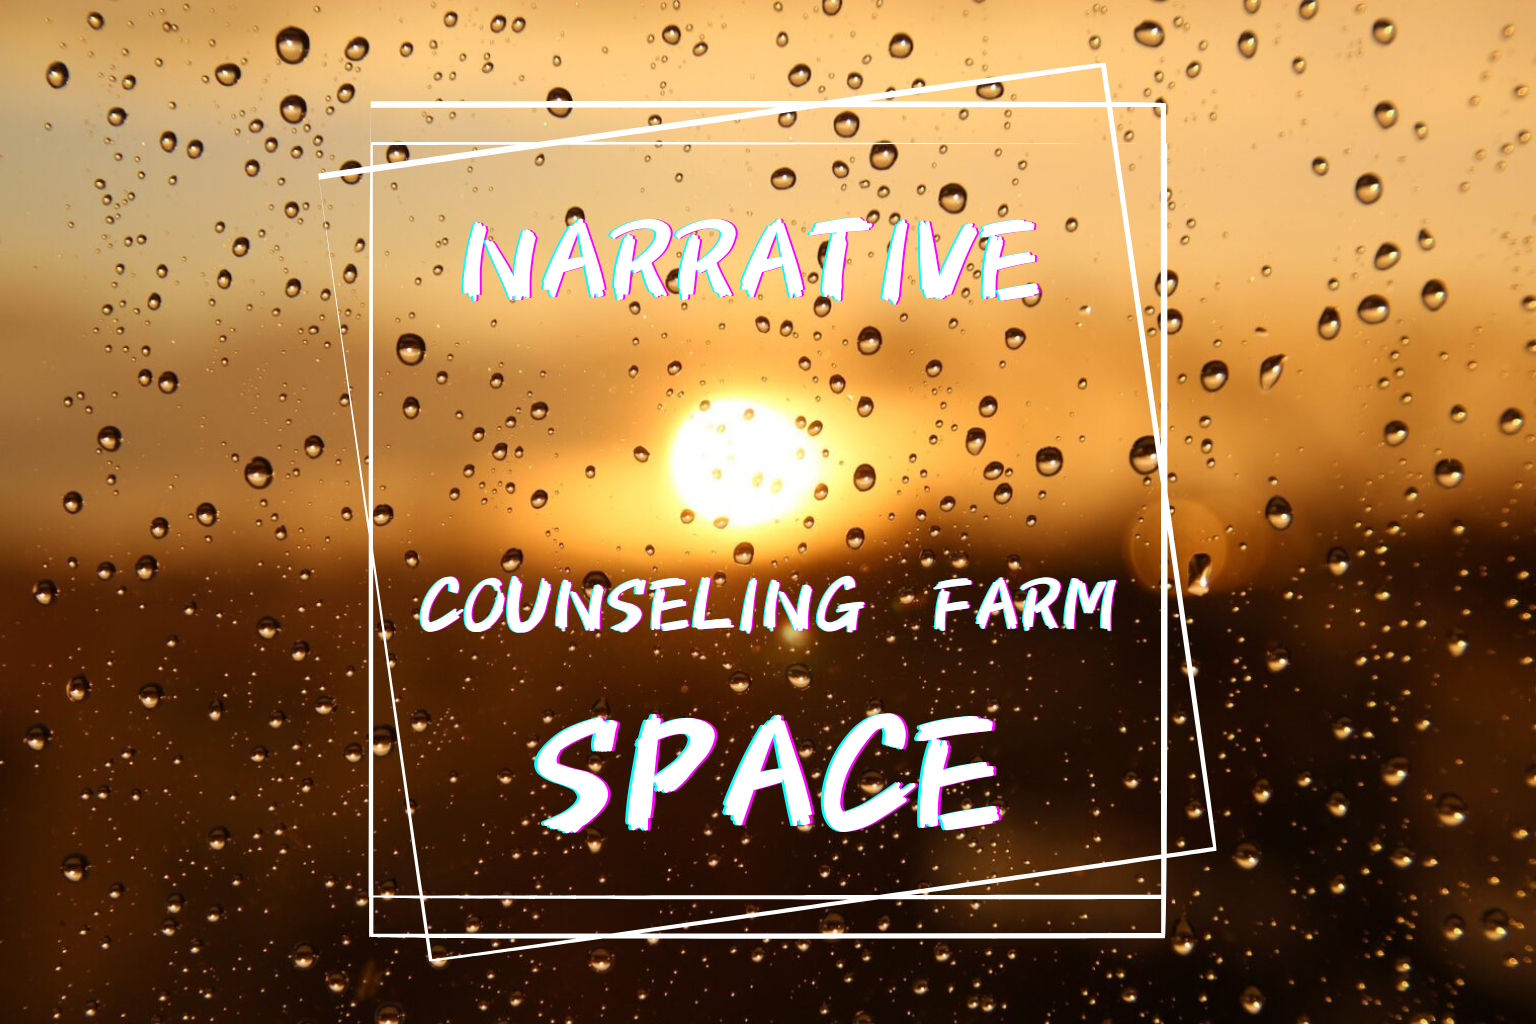 narrative counselling farm space